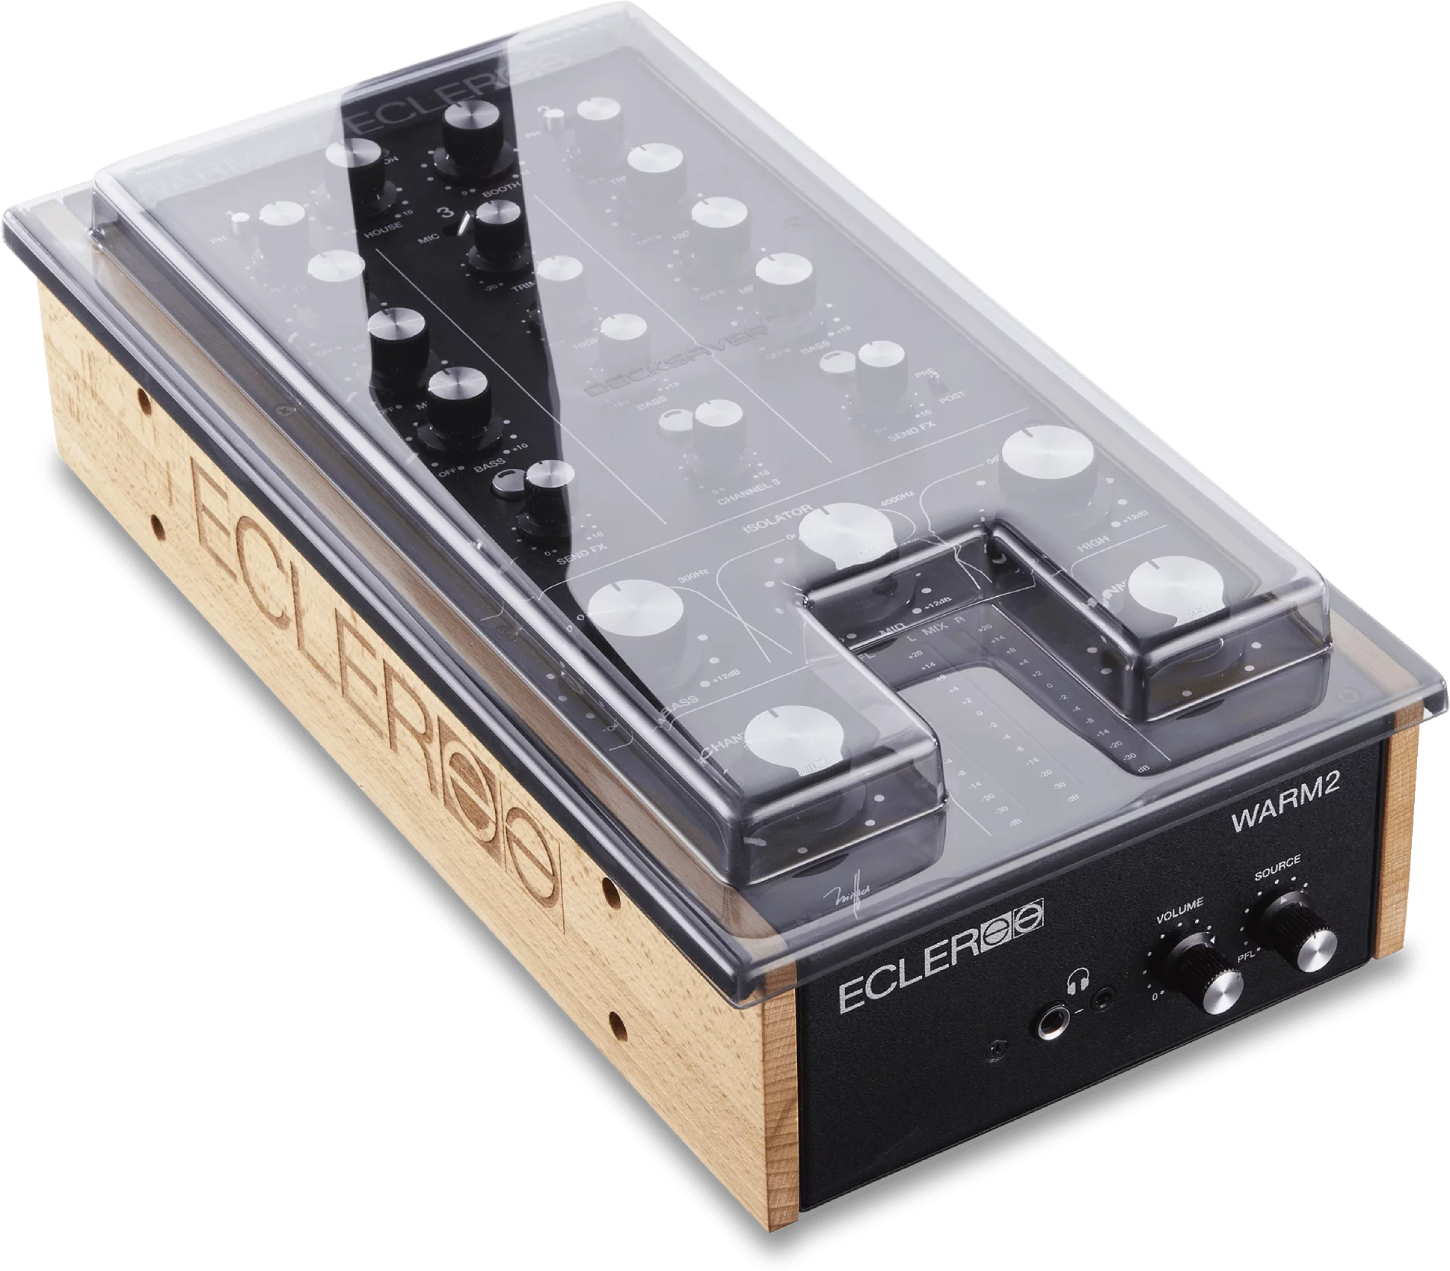 Decksaver Eclerc Warm 2 - Turntable cover - Main picture